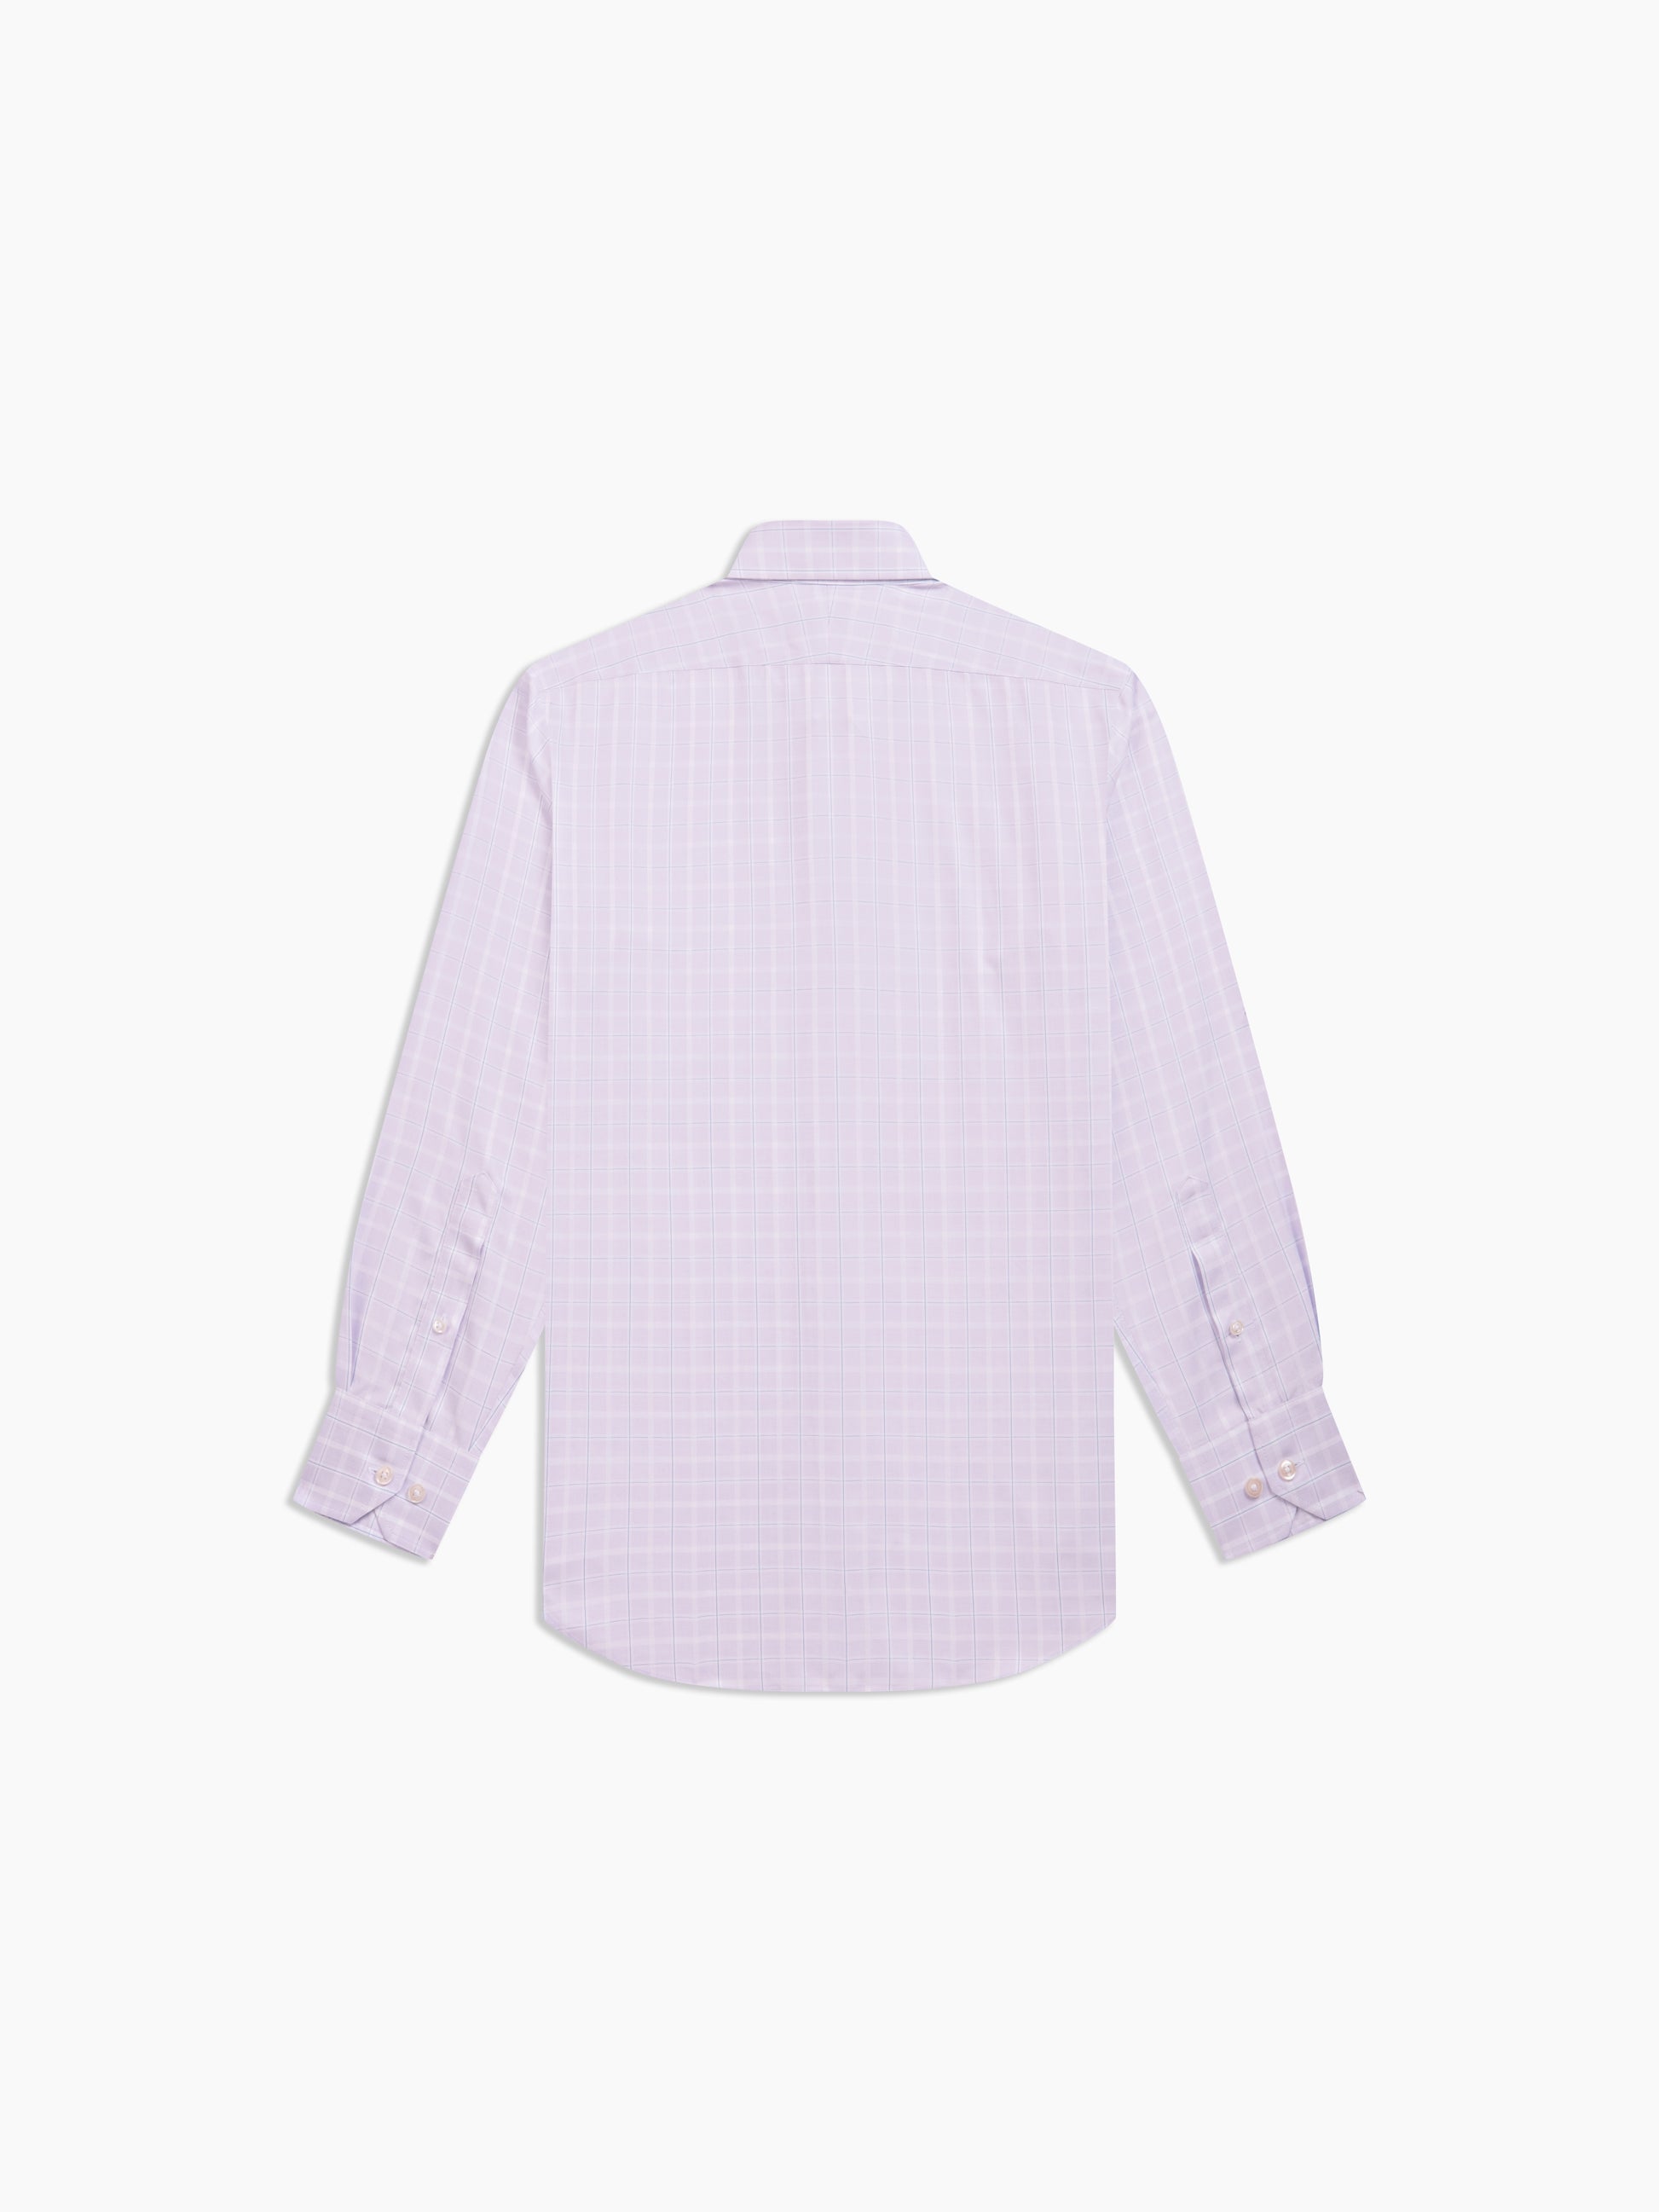 Image 4 of Non-Iron Purple Grid Check Twill Fitted Single Cuff Classic Collar Shirt